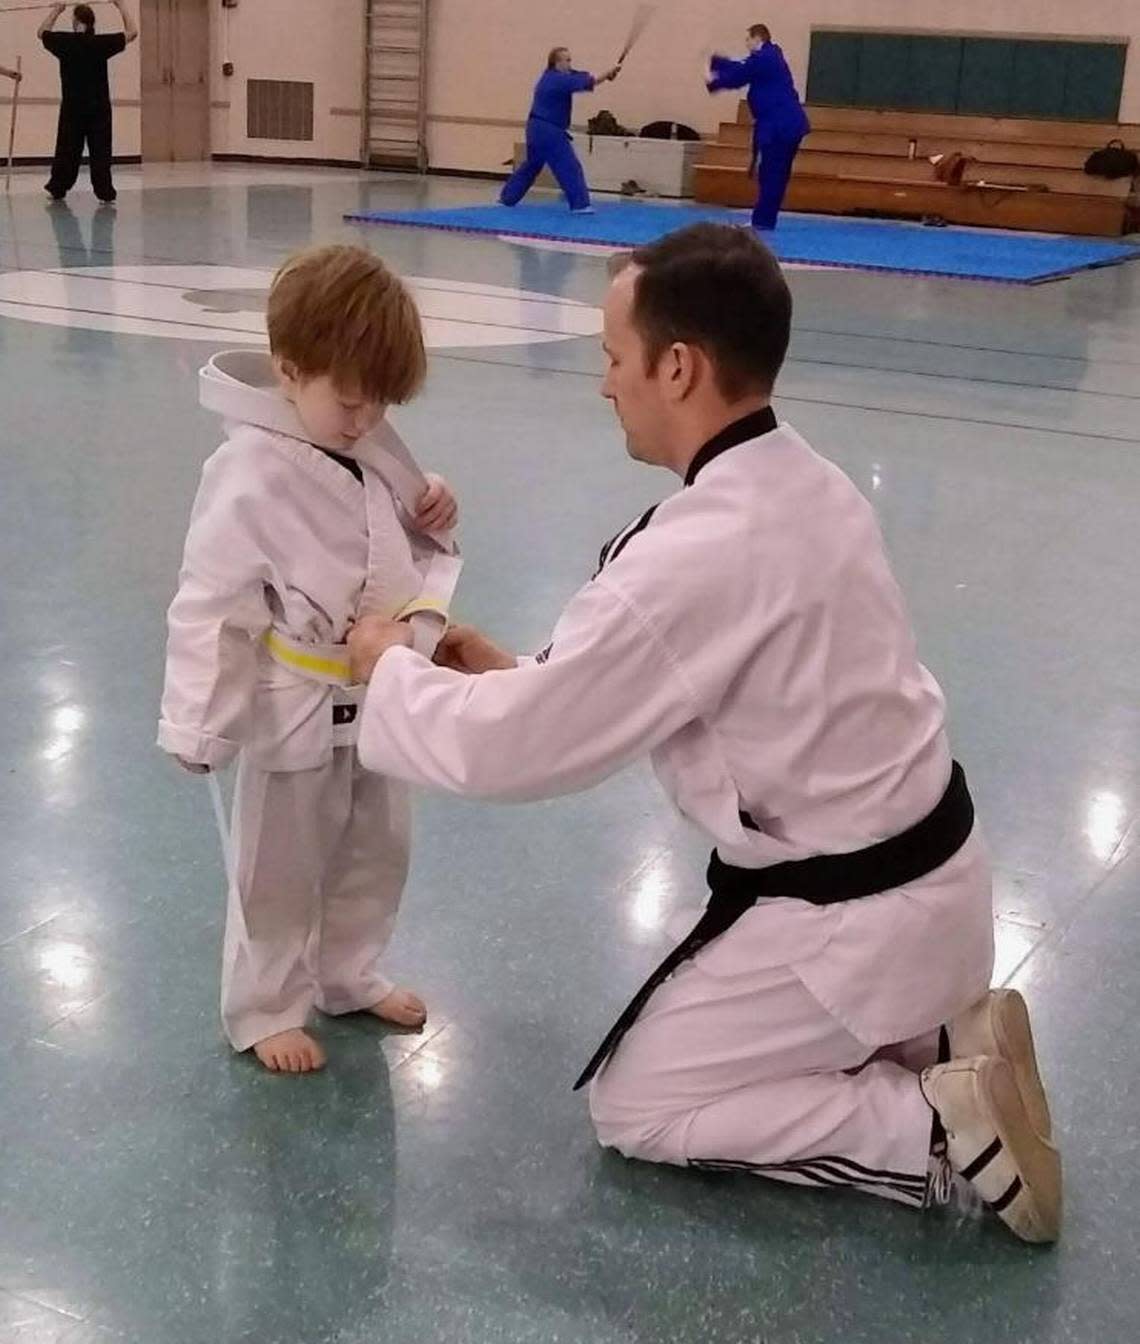 Brandon Whipple ties a new belt on his son AJ after his taekwondo test at the Osage Park Recreation Center.